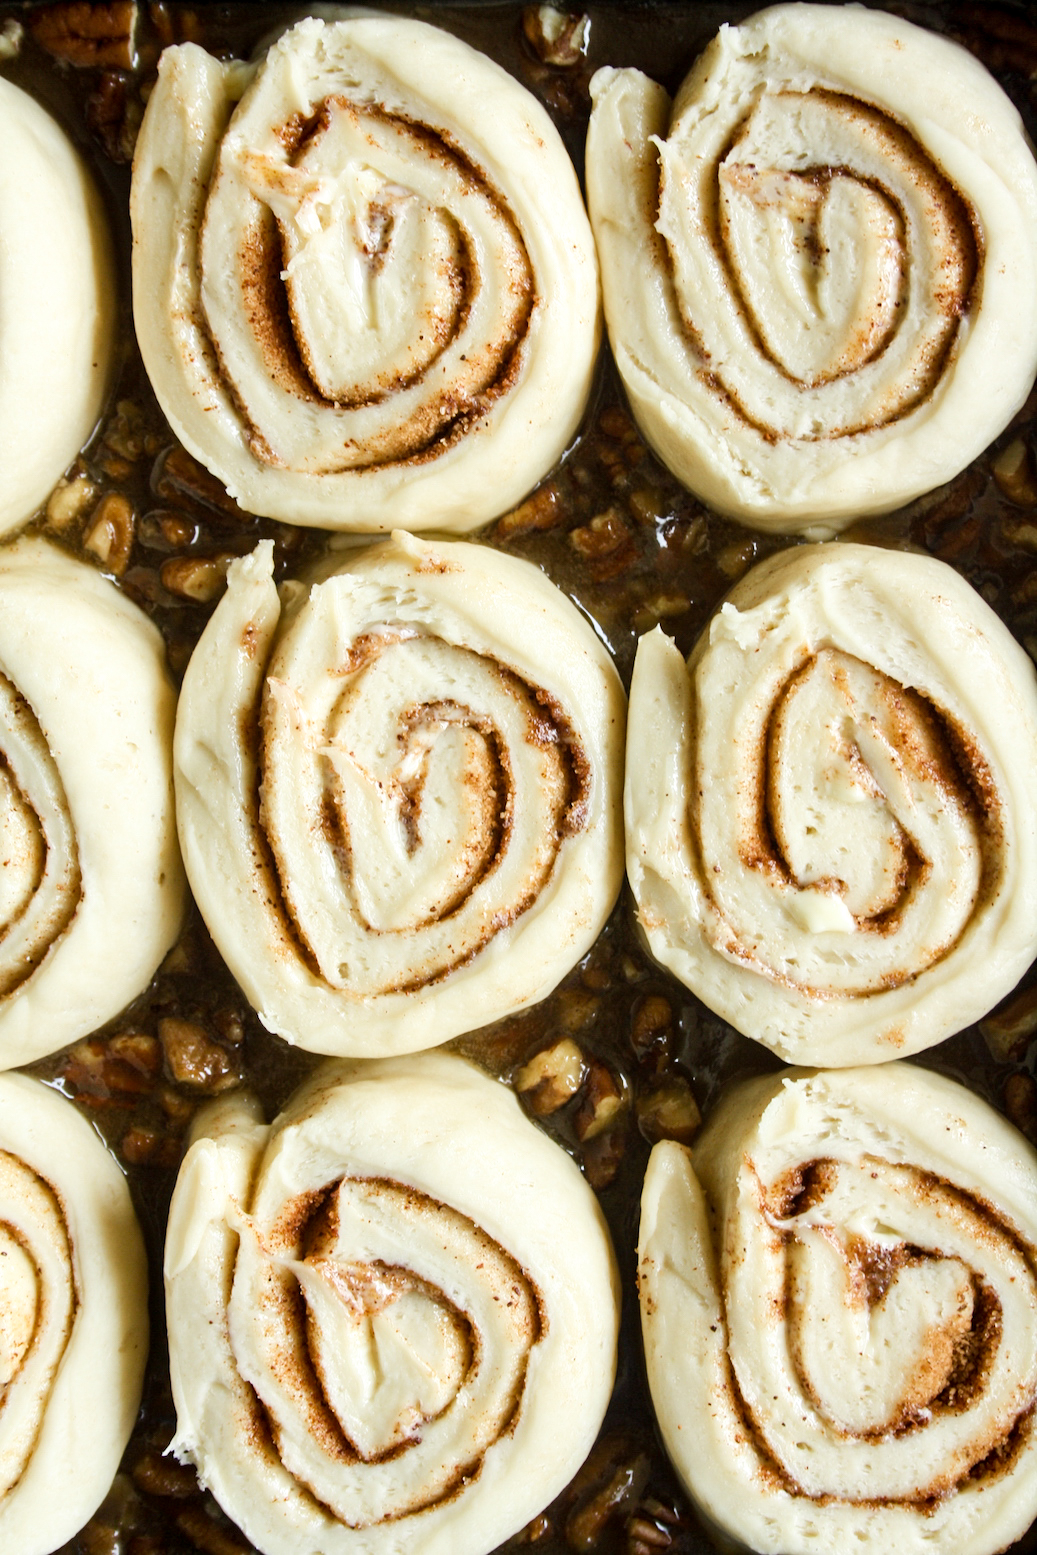 Gooey and sticky cinnamon rolls with a pecan caramel topping